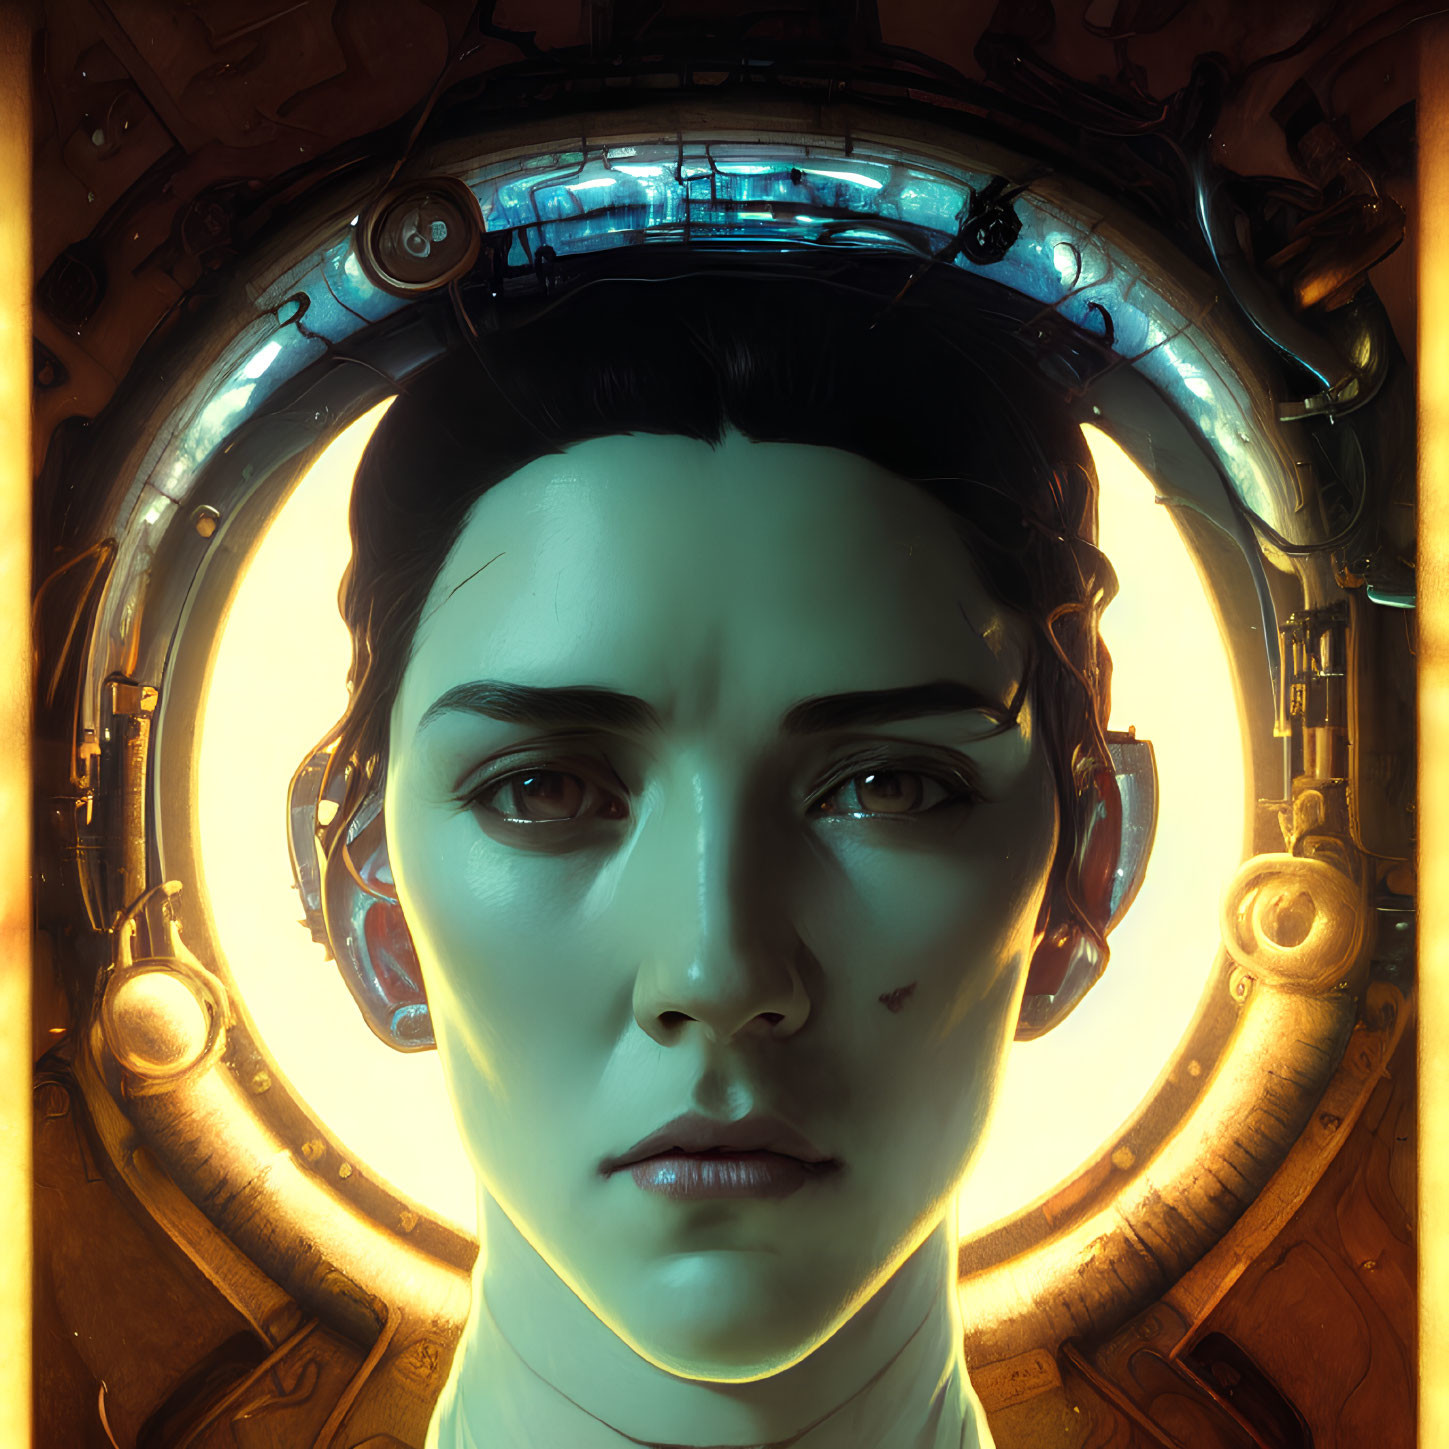 Detailed Close-Up Illustration of Person in Futuristic Helmet with Intricate Mechanical Details